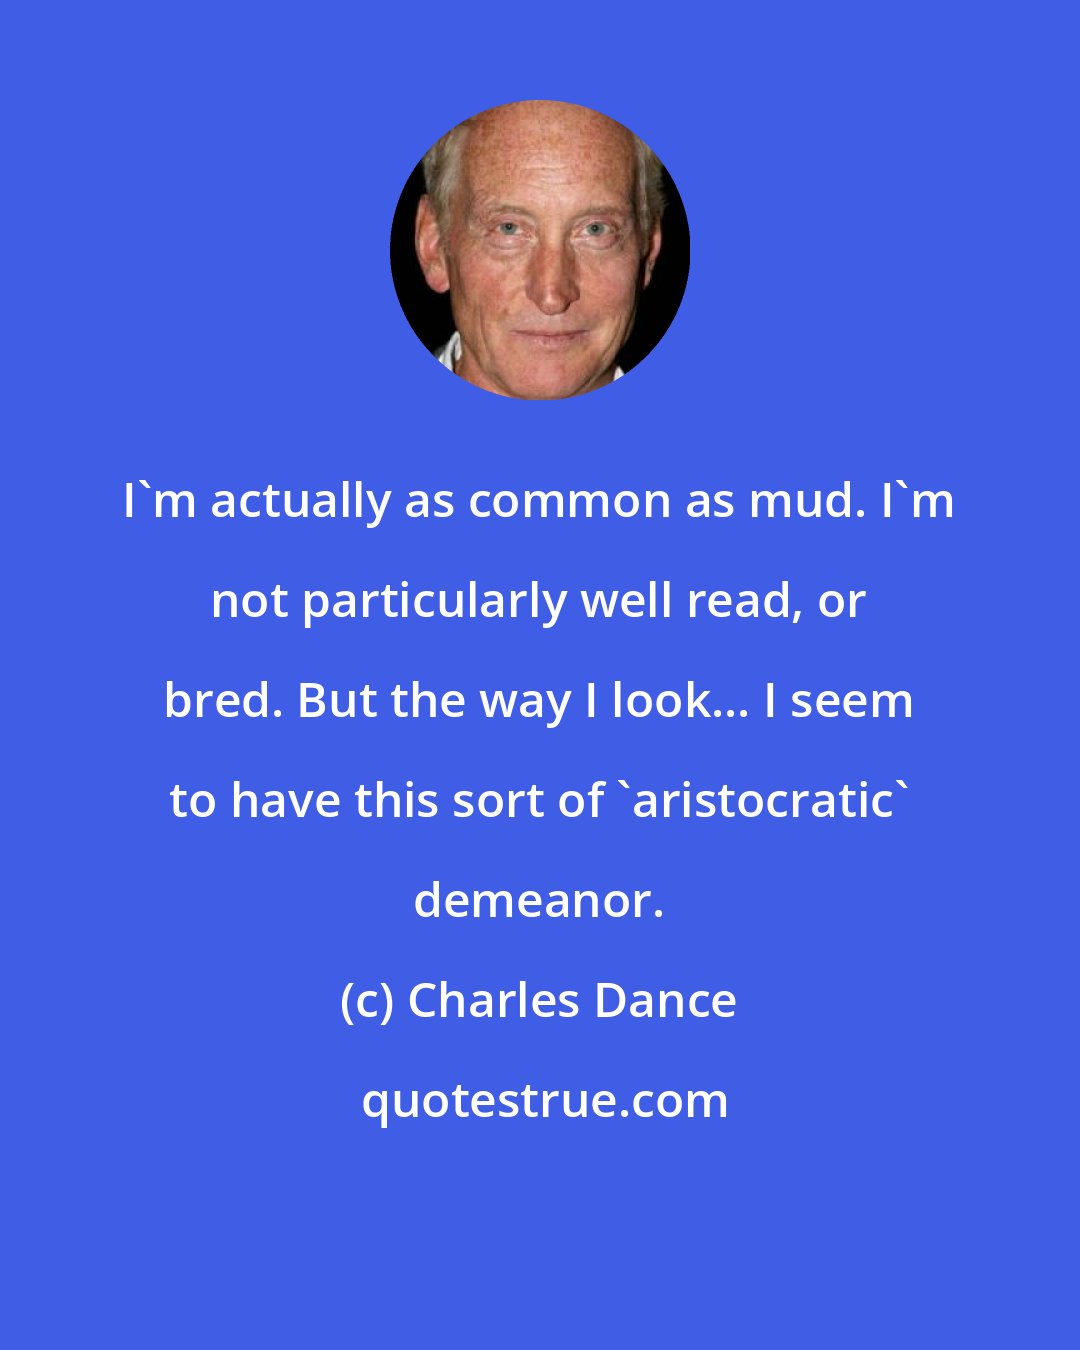 Charles Dance: I'm actually as common as mud. I'm not particularly well read, or bred. But the way I look... I seem to have this sort of 'aristocratic' demeanor.